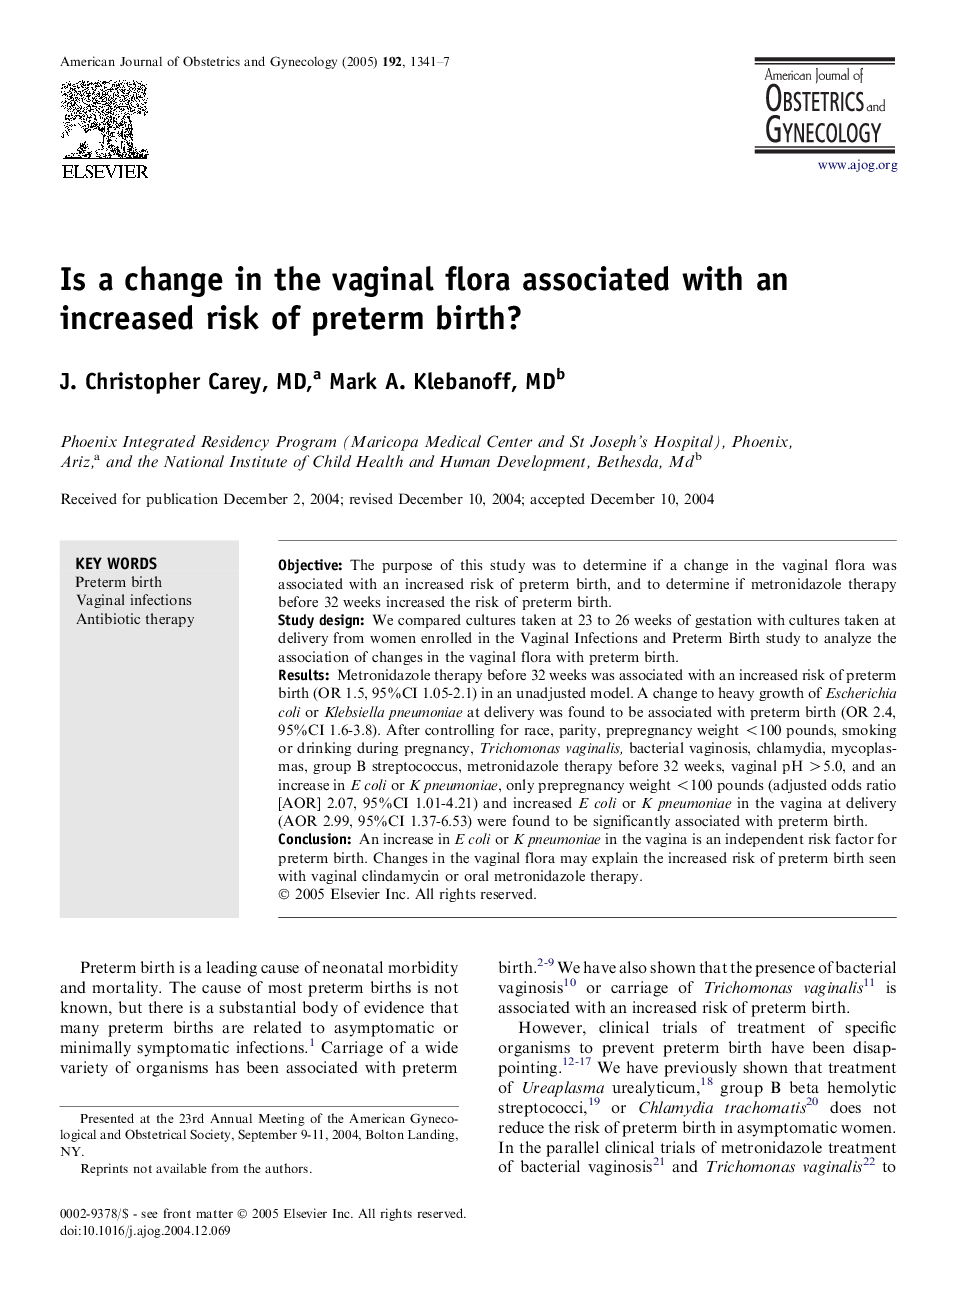 Is a change in the vaginal flora associated with an increased risk of preterm birth?